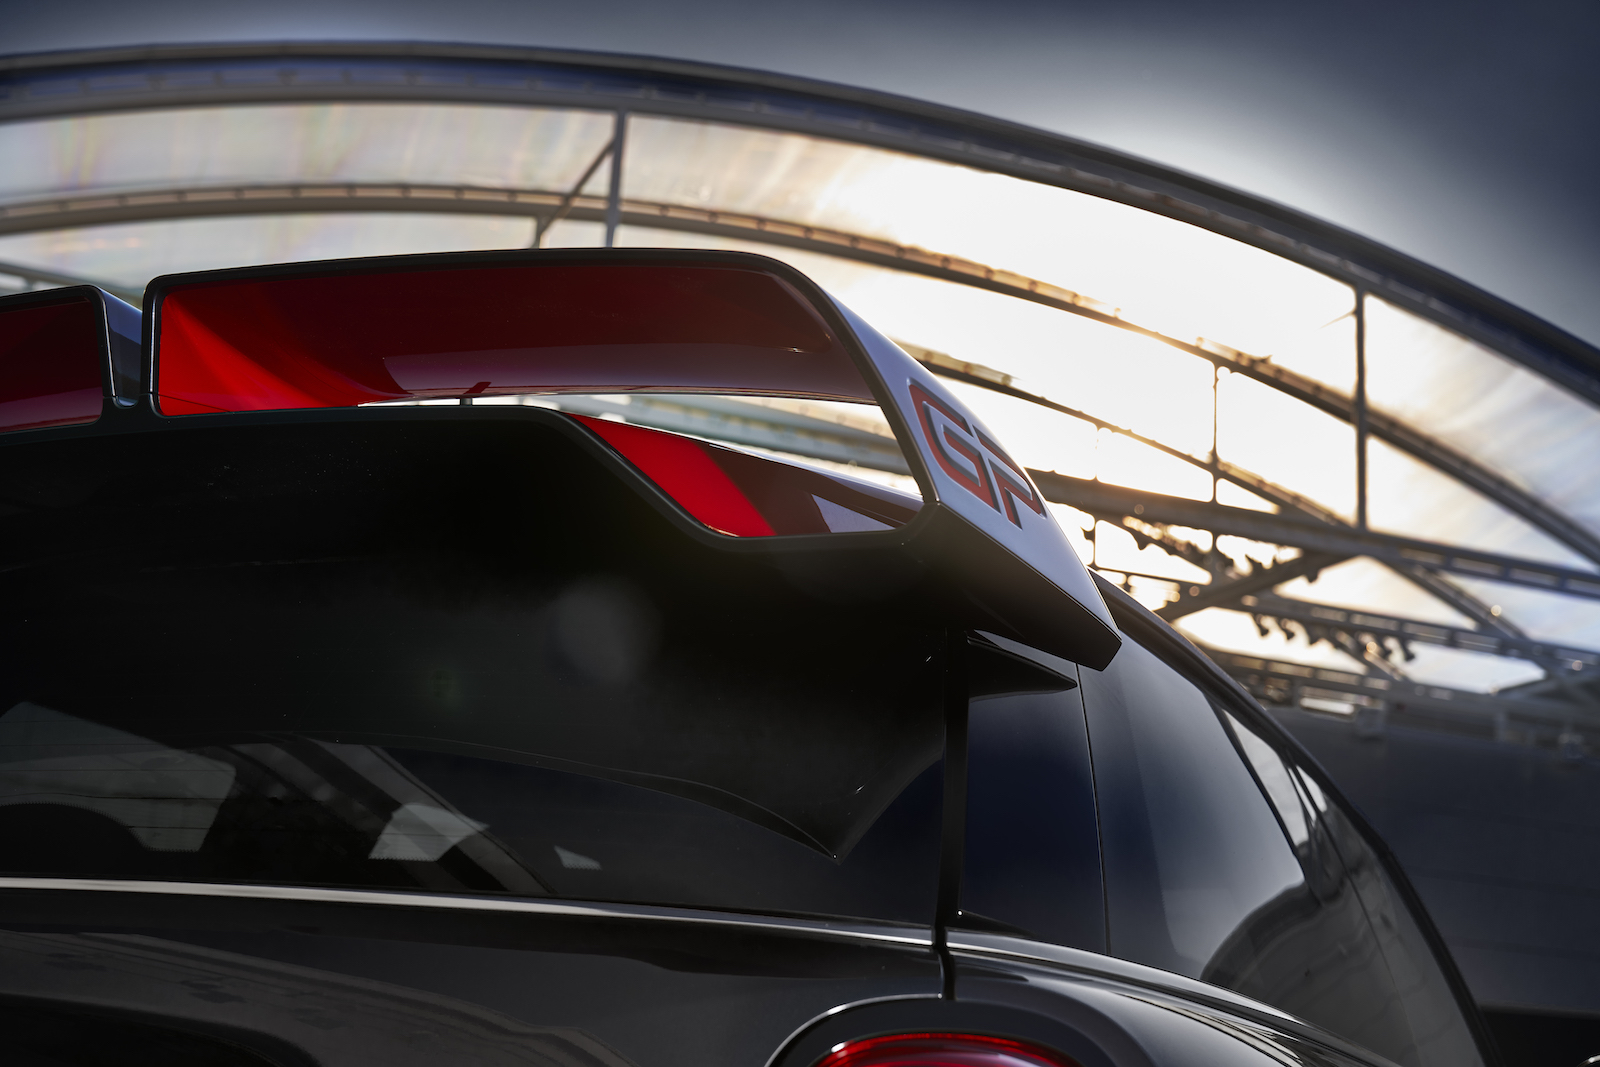 2020 MINI John Cooper Works GP previewed, over 220kW